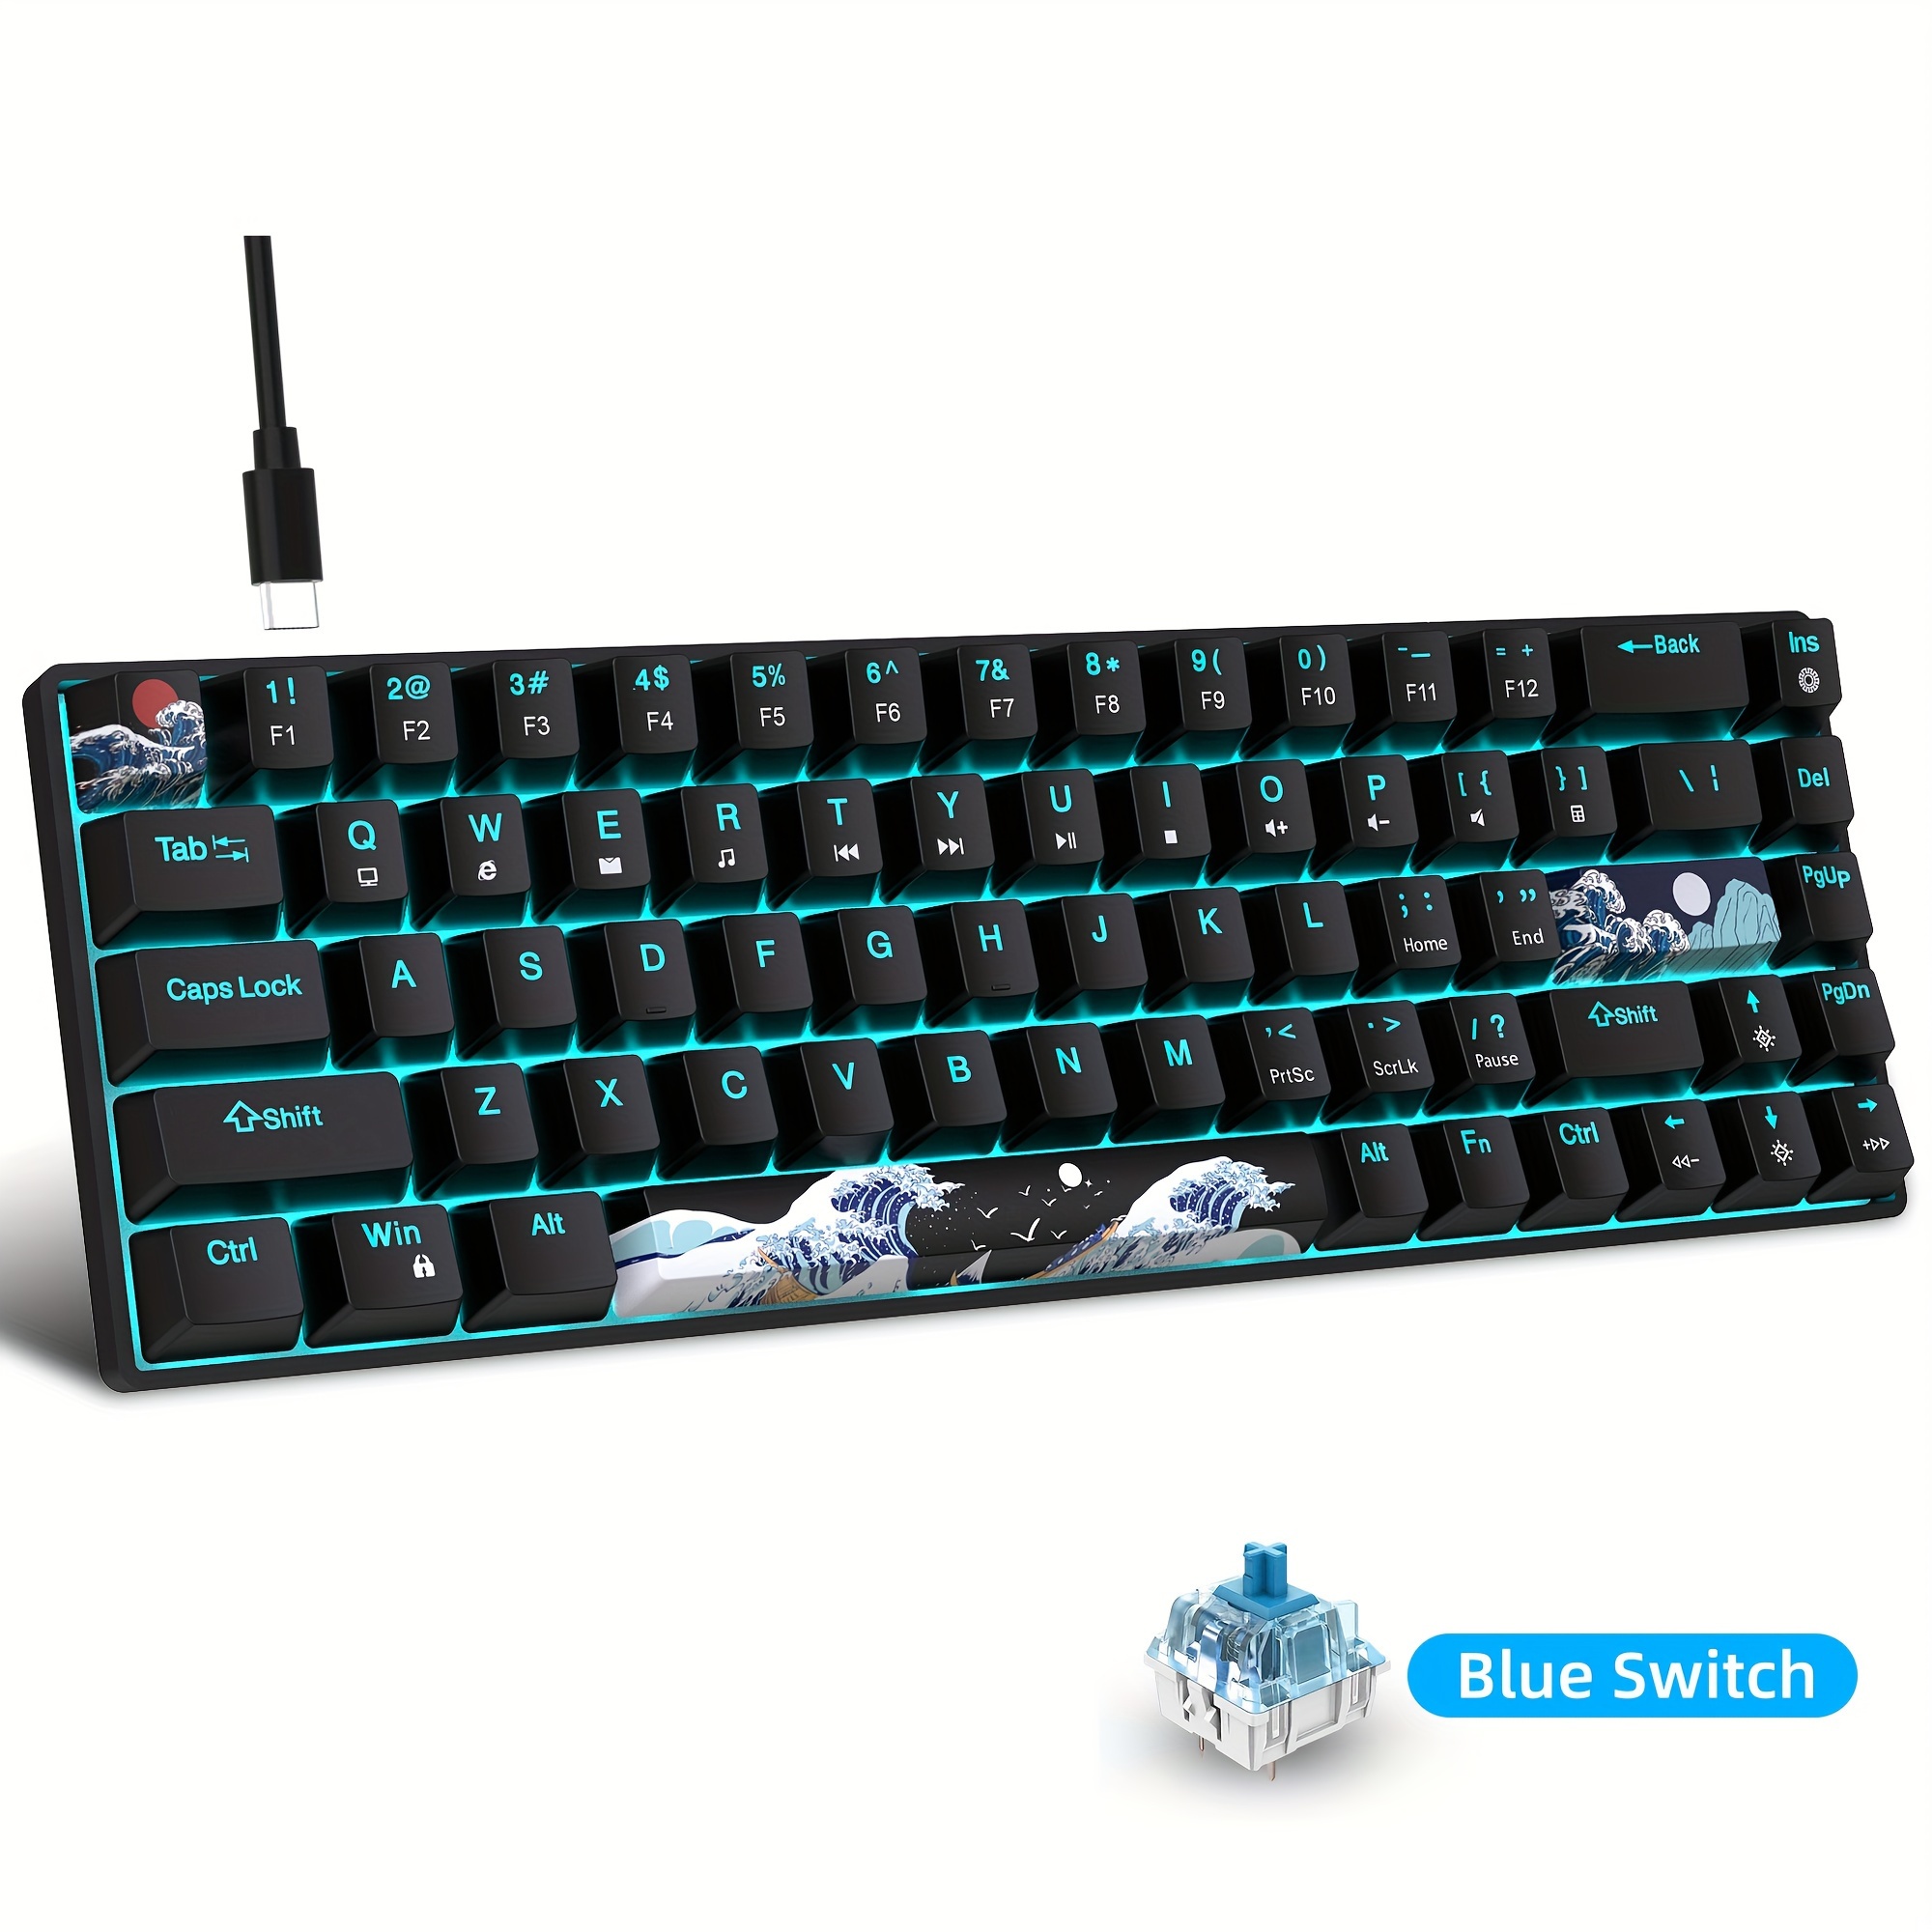 

Ultra Compact 60% Gaming Mechanical Keyboard - 68 Keys With Blue Switches, Anti-ghosting, Ergonomic Design & Backlit For Pc And Laptop Gamers, Includes Pbt Keycaps